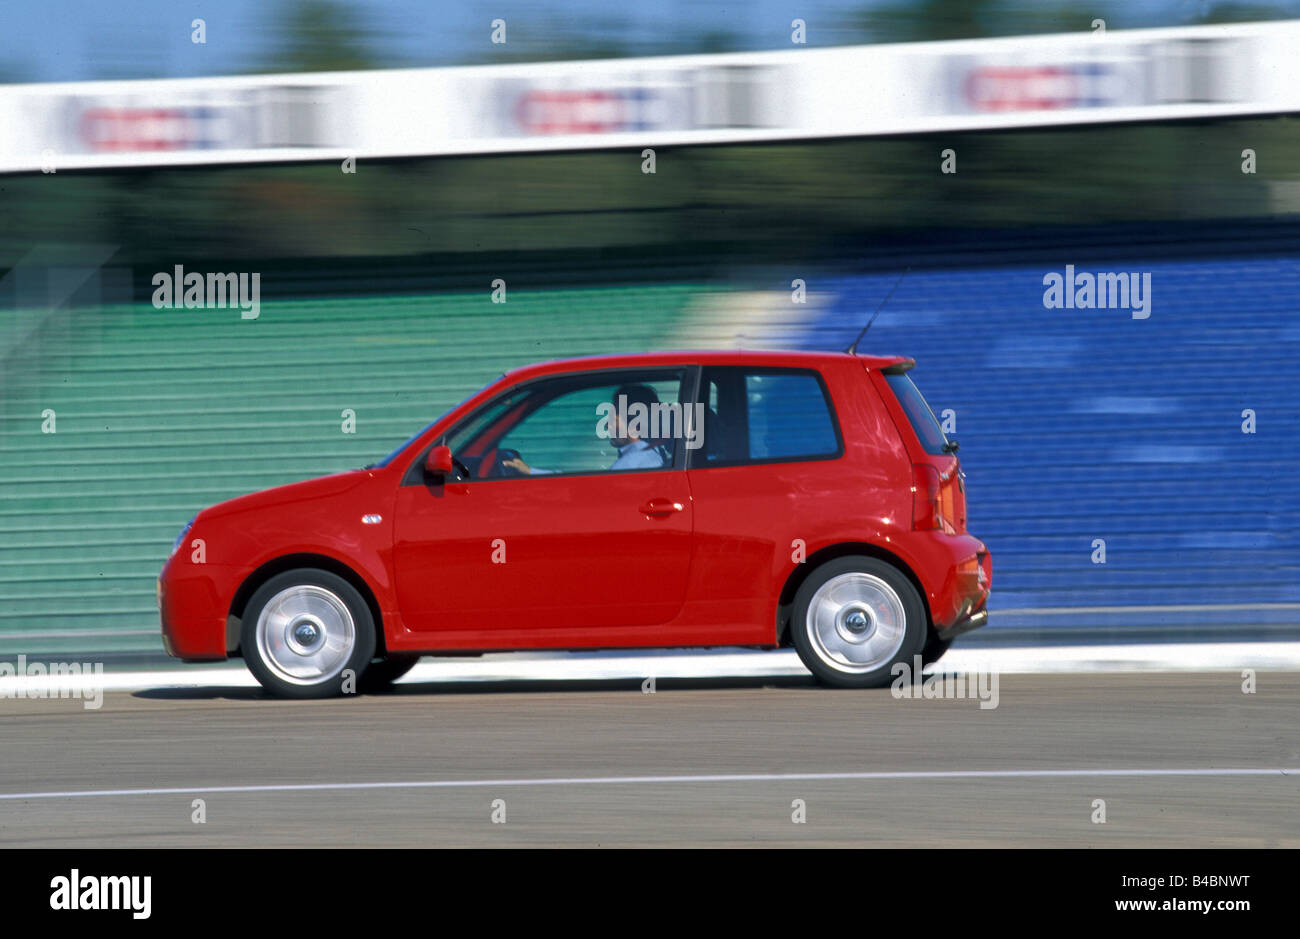 Car, VW Volkswagen Lupo GTI, model year 1998-2003, red, Miniapprox.s, Limousine, FGHDS, Tuning, tuned cars, driving, side view, Stock Photo